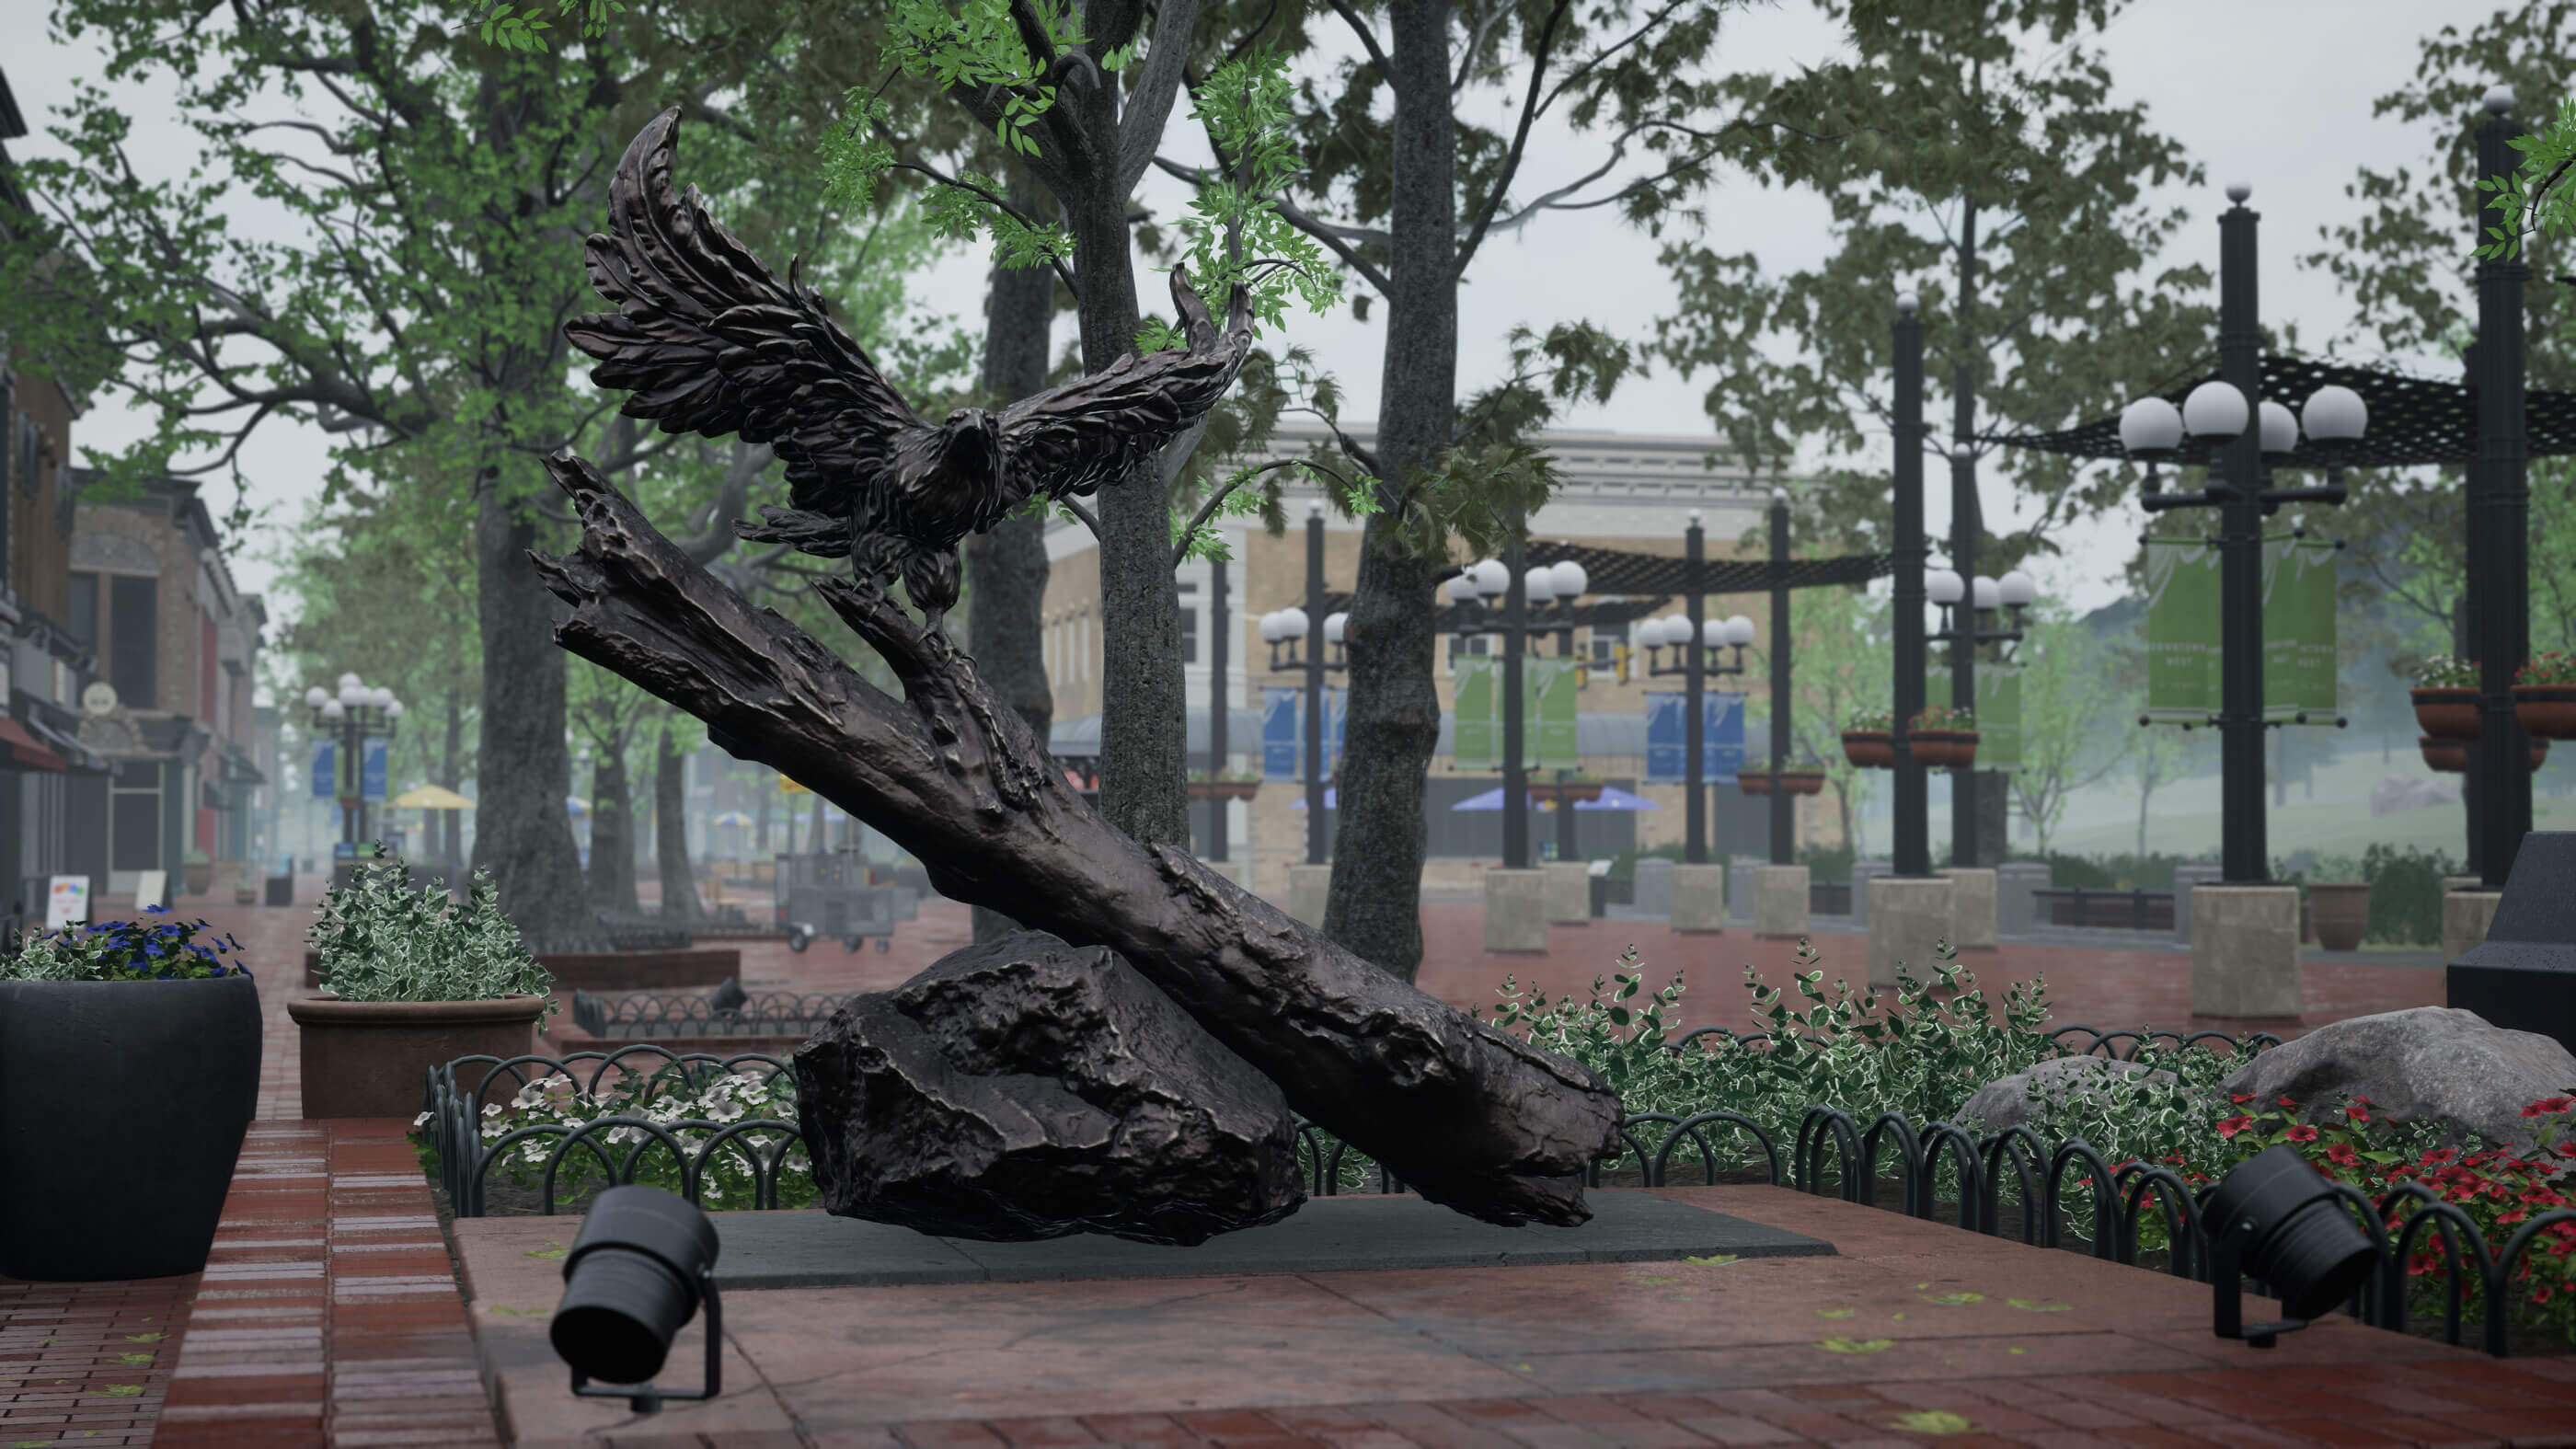 A plaza area on a rainy day with a statue of an eagle.